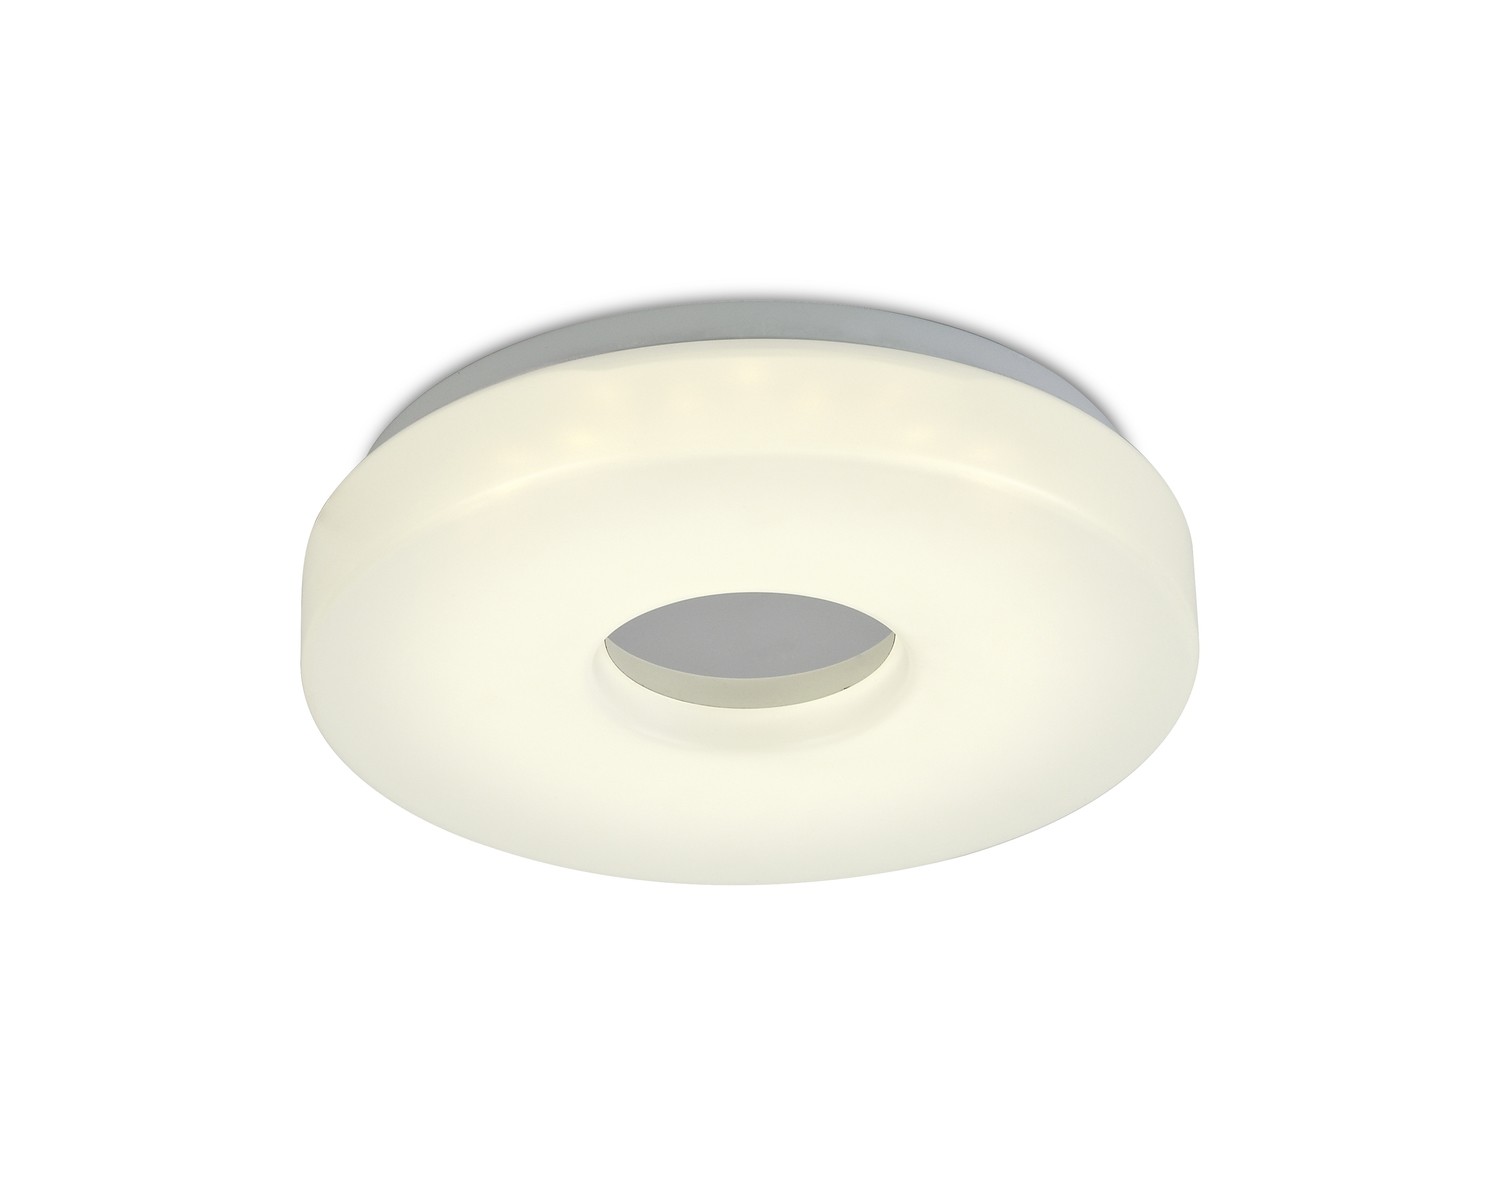 Joop IP44 12W LED Small Flush Ceiling Light, 4000K 1000lm CRI80, Polished Chrome With White Acrylic Diffuser